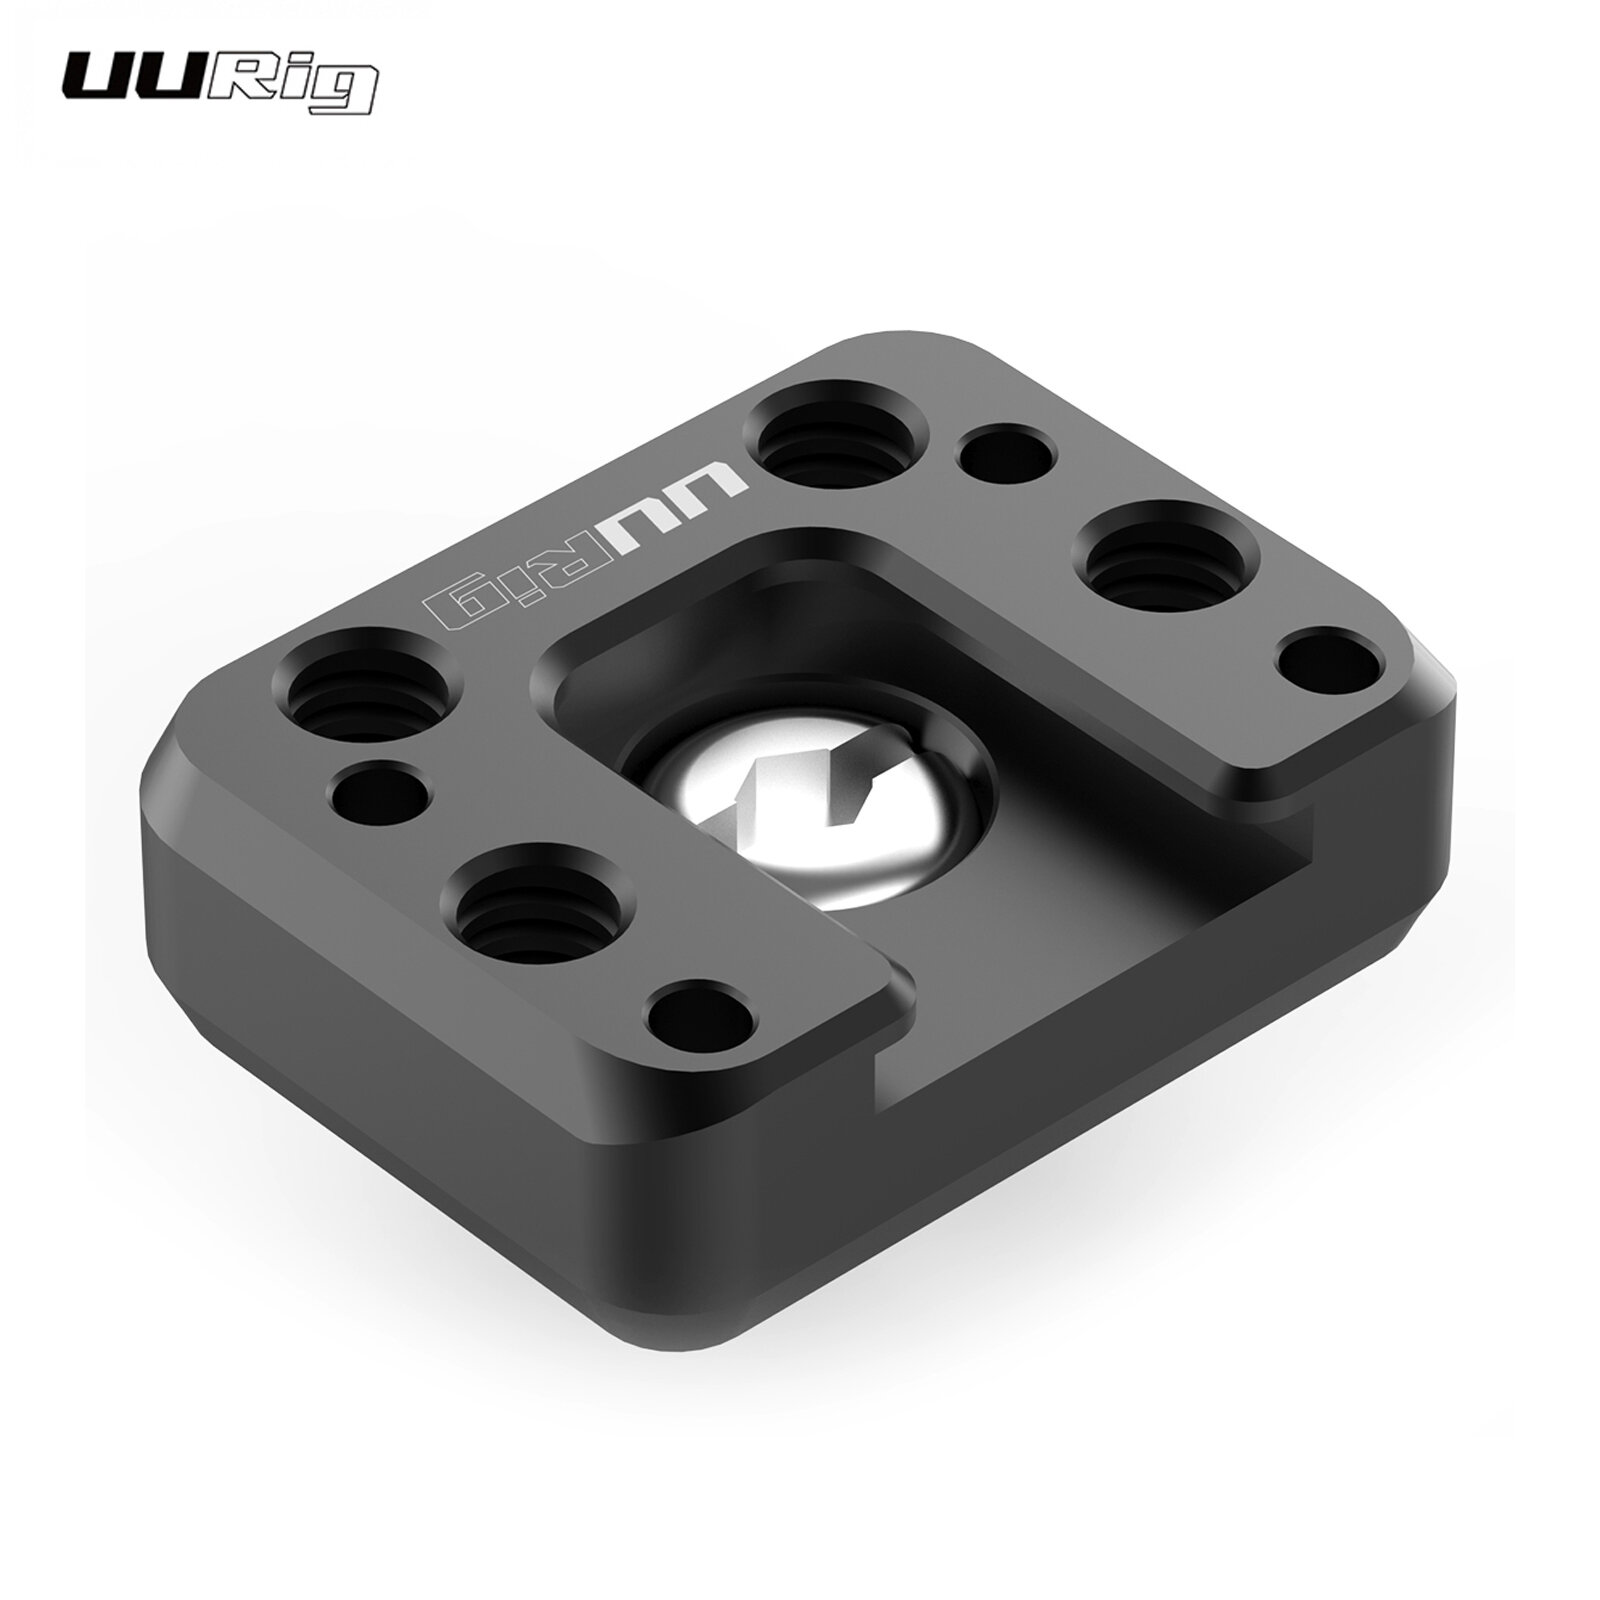 

UURig R070 Gimbal Stabilizer Mount Plate Extension Plate with Cold Shoe 1/4 Inch Screw Arri Locating Hole for ZHIYUN Cra